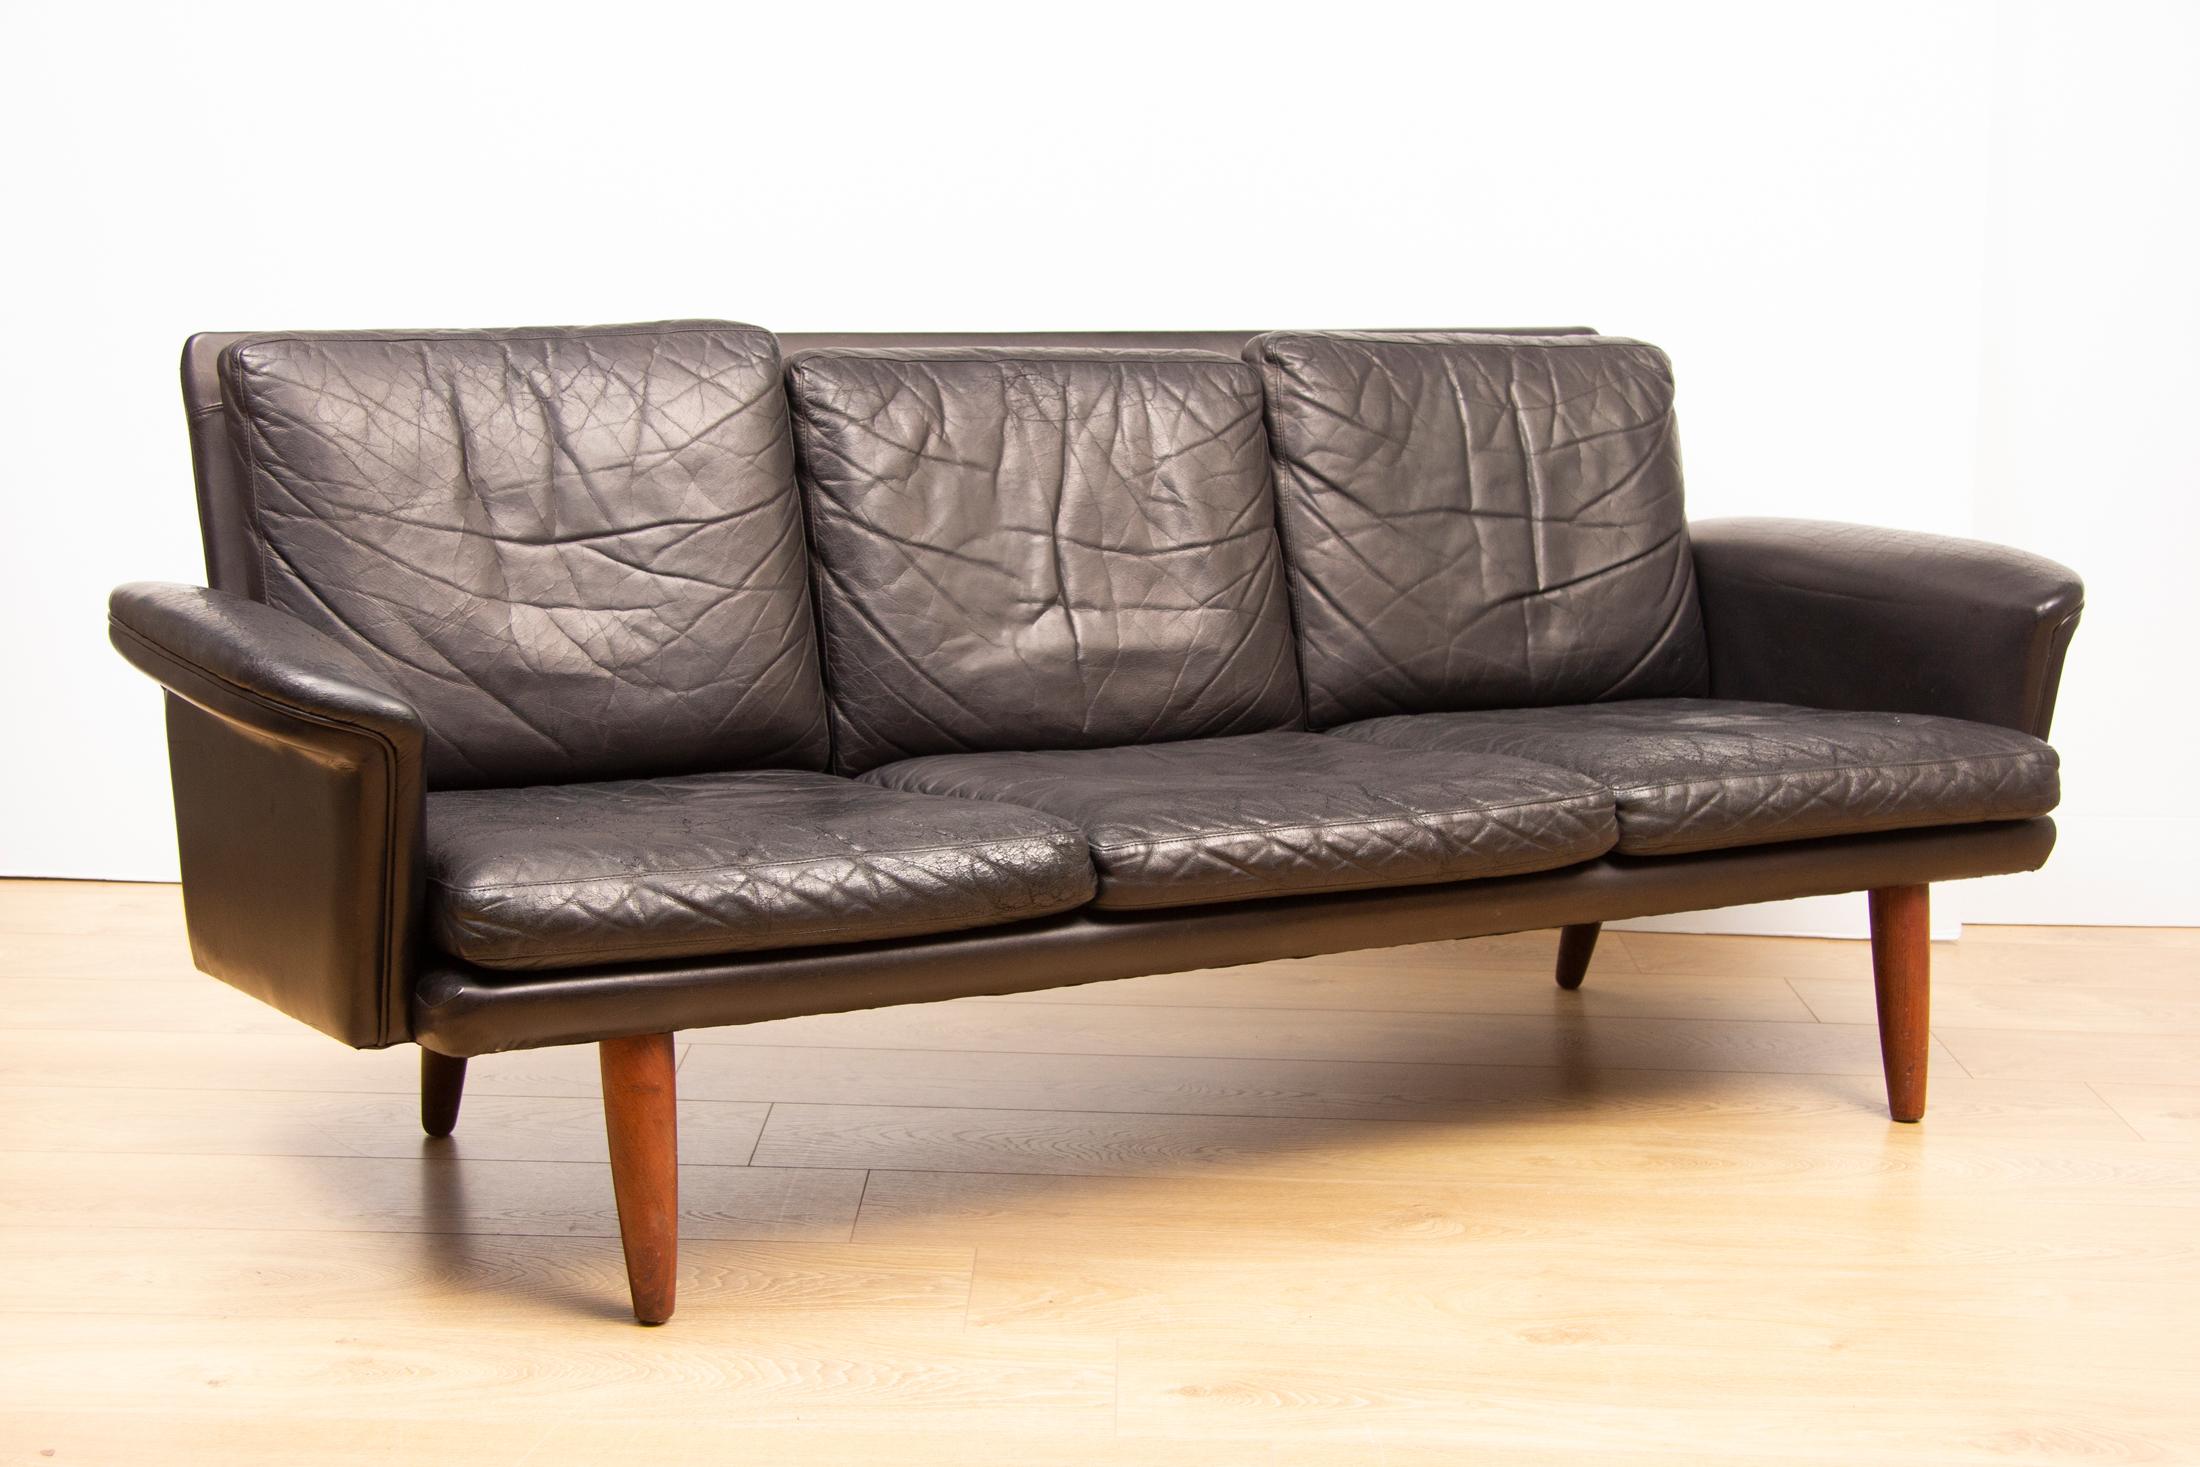 Midcentury Danish black leather sofa three-seat with age related wear, no holes or tears.